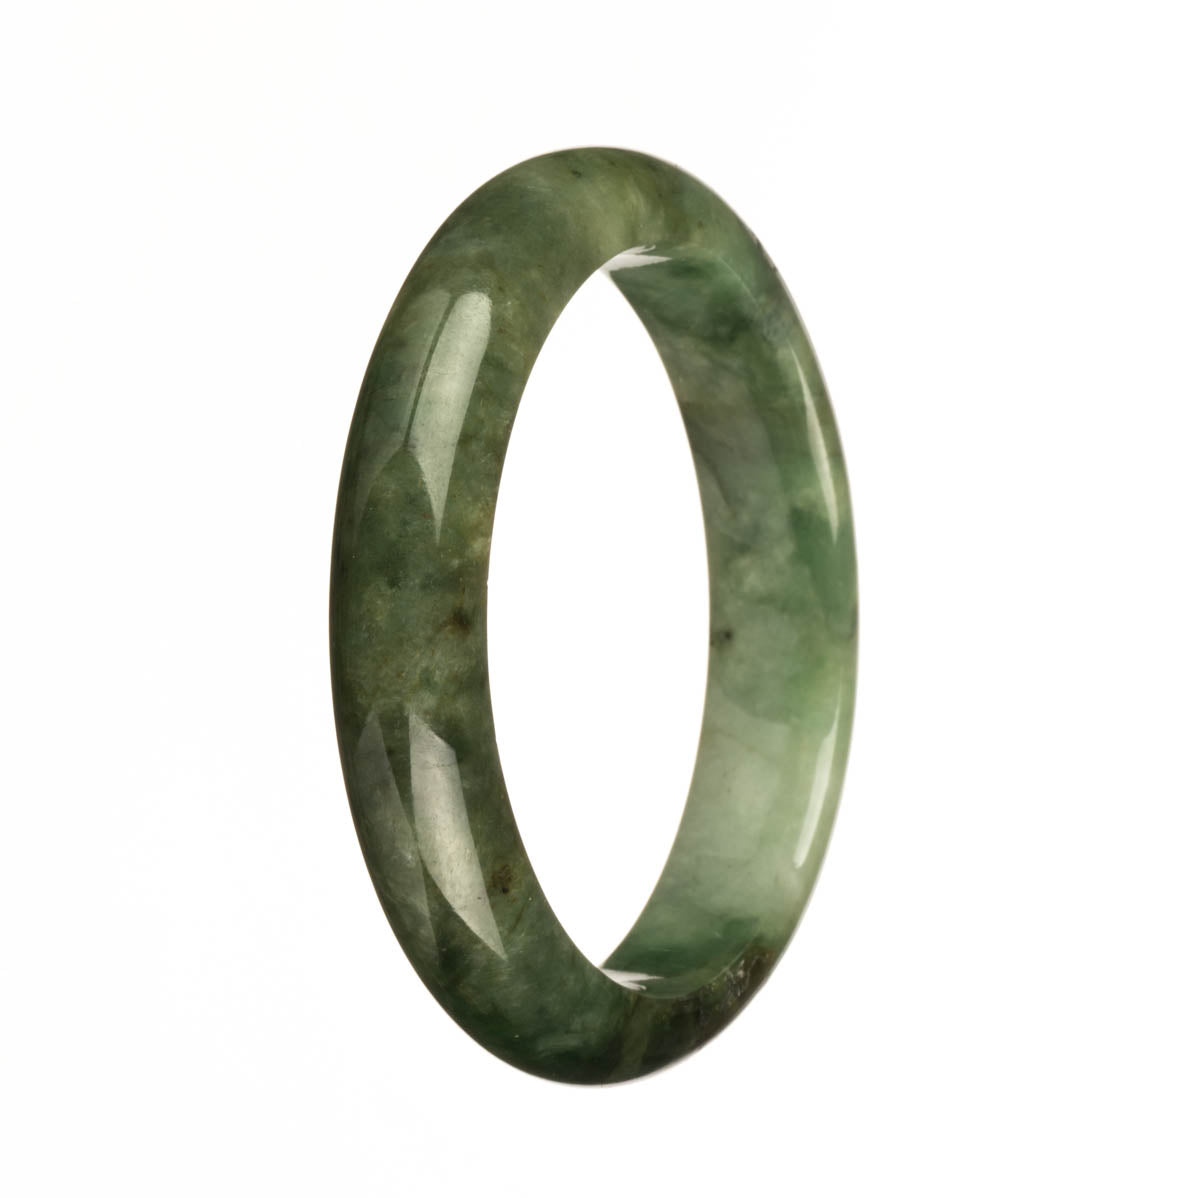 A close-up image of a vibrant green jade bangle with intricate patterns. The bangle is in a half-moon shape and measures 58mm in diameter. This exquisite piece of jewelry is made with genuine Type A Green Patterns Burma Jade.